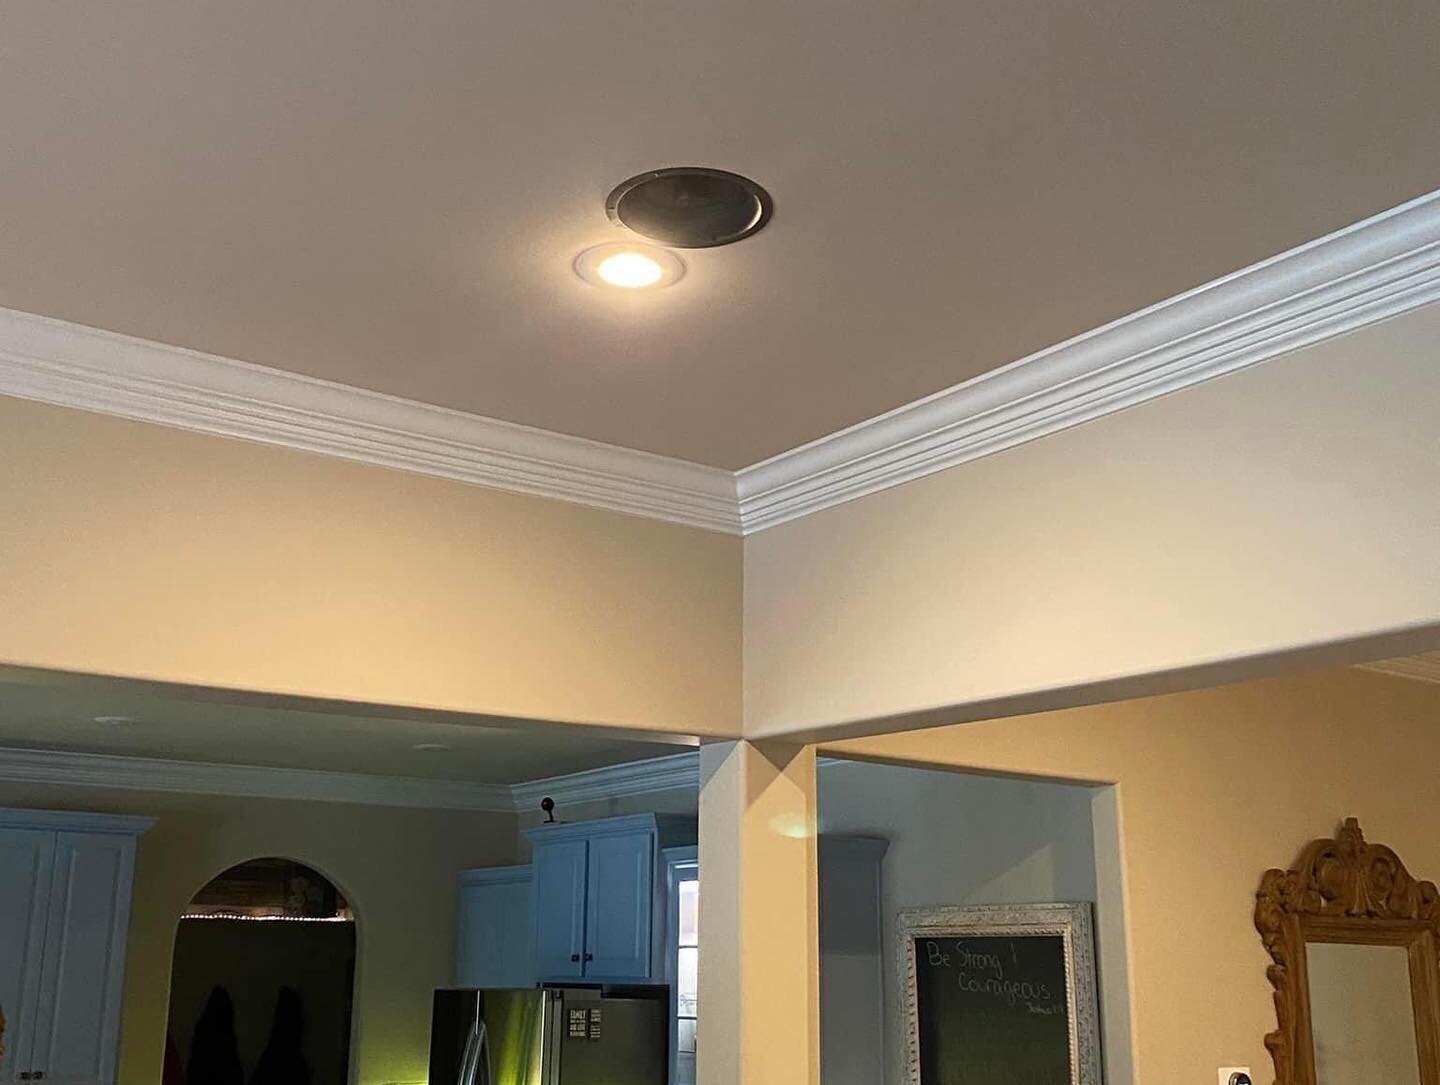 We got to install four 10&rsquo; Klipsch in ceiling speakers, a really nice Definitive Tech center speaker (1000 series) and a Denon receiver fully outfitted w/7.2 channel and Bluetooth capabilities.  We&rsquo;ll post a video w/sound so you can hear 